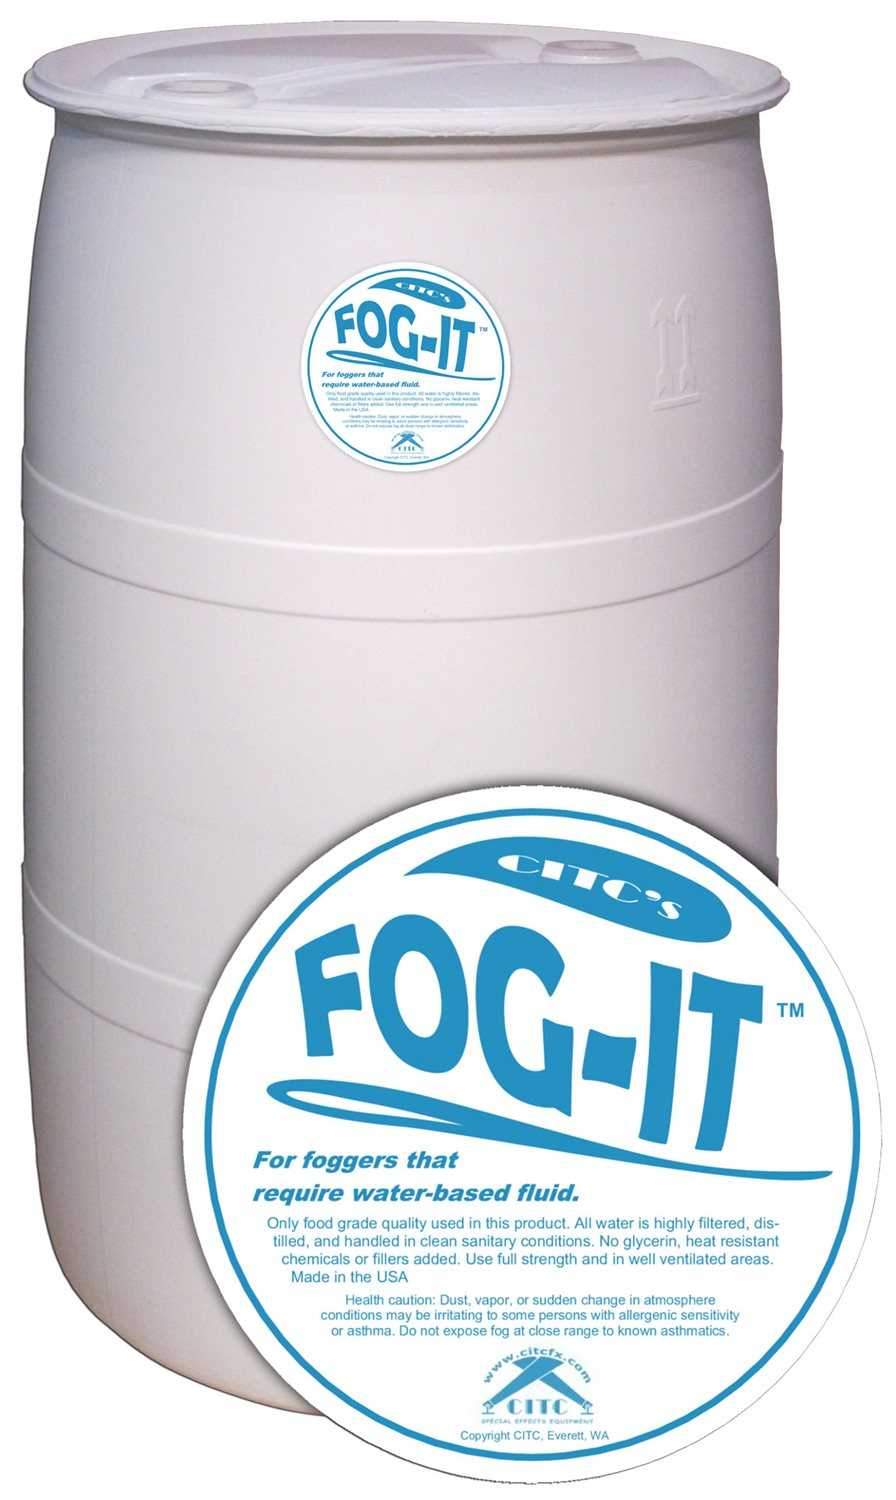 CITC Fog-IT Water Based Fog Fluid 55 Gallon Drum - ProSound and Stage Lighting